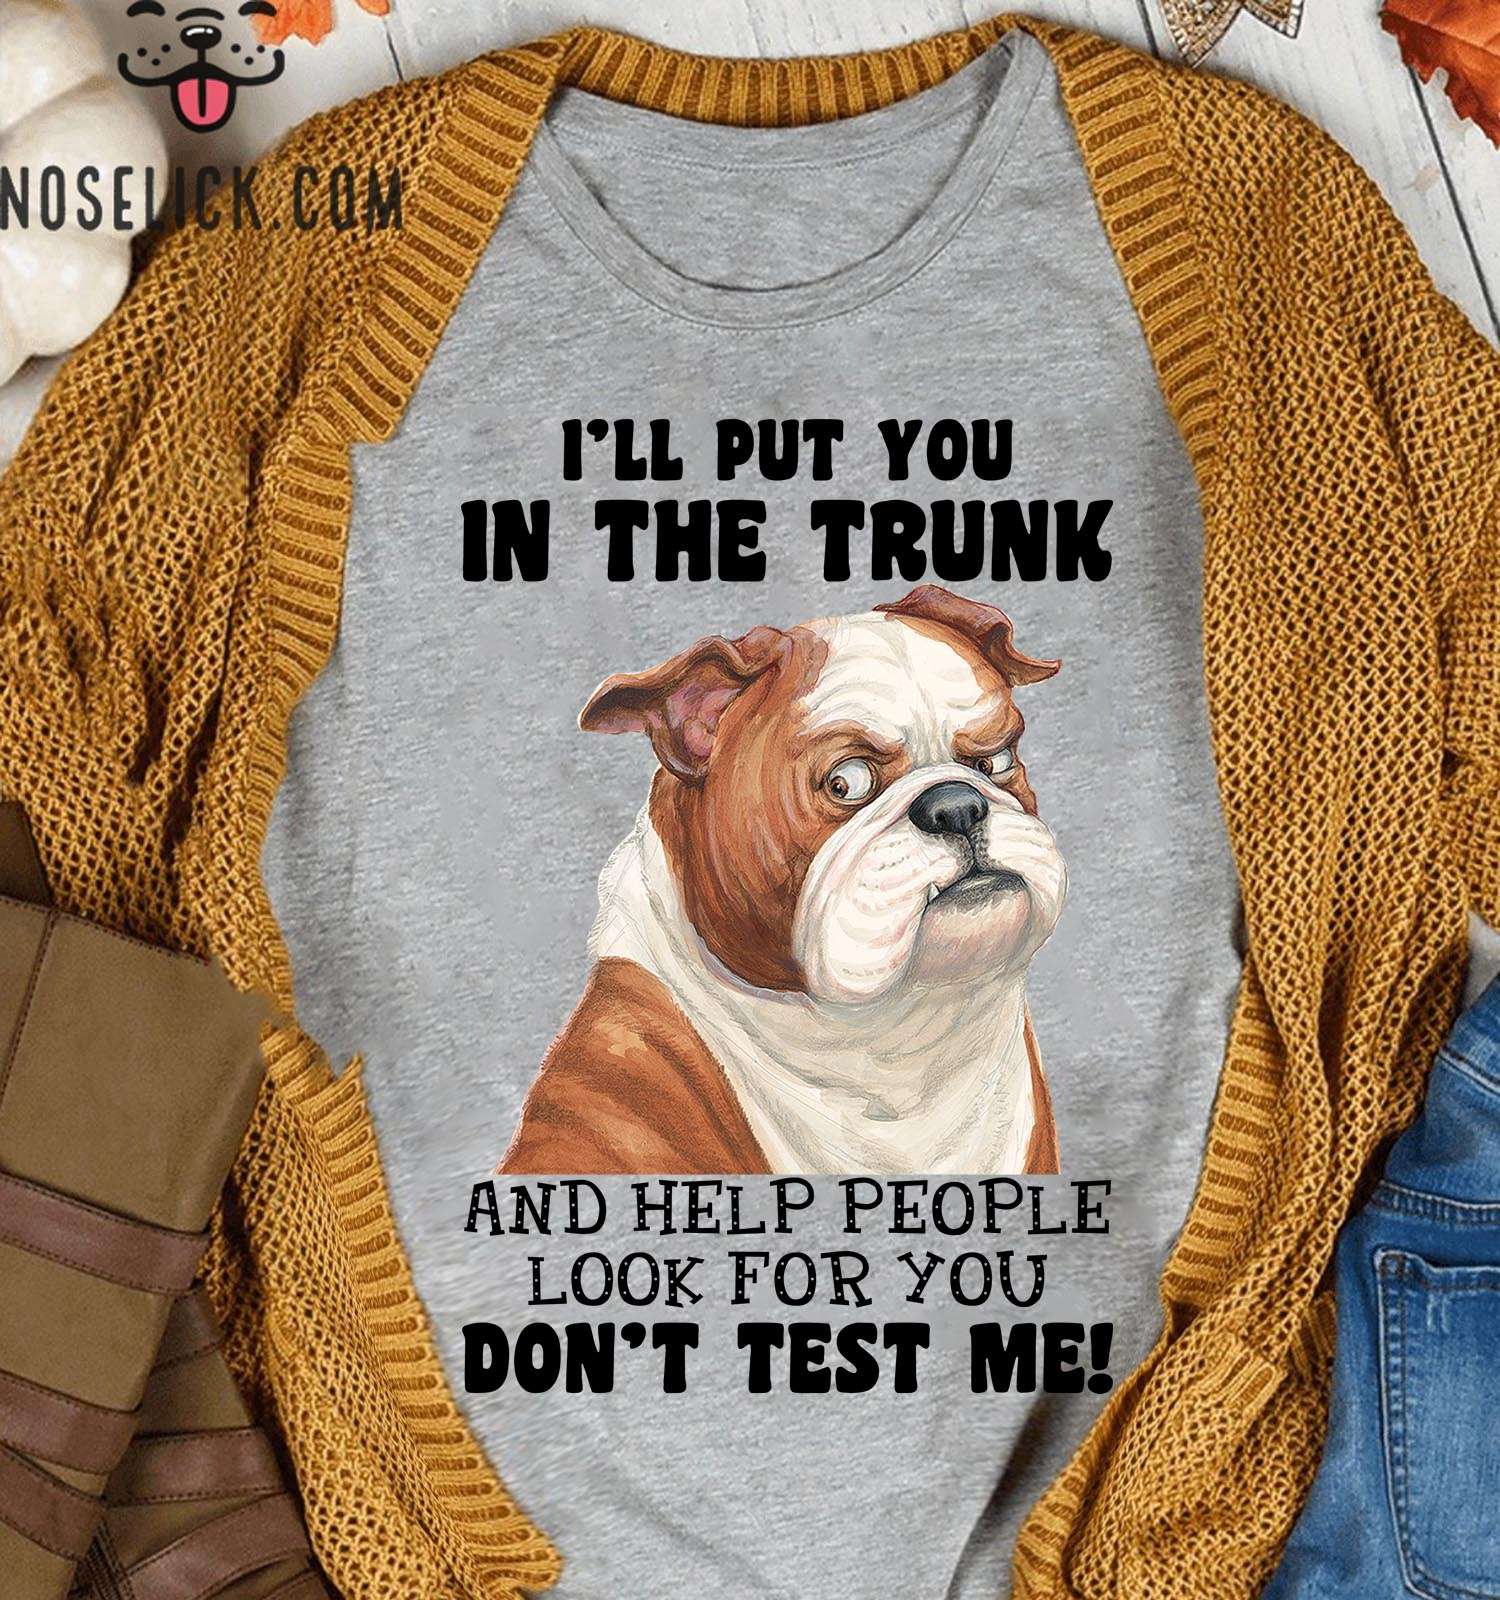 I'll put you in the trunk and help people look for you - Angry bull dog